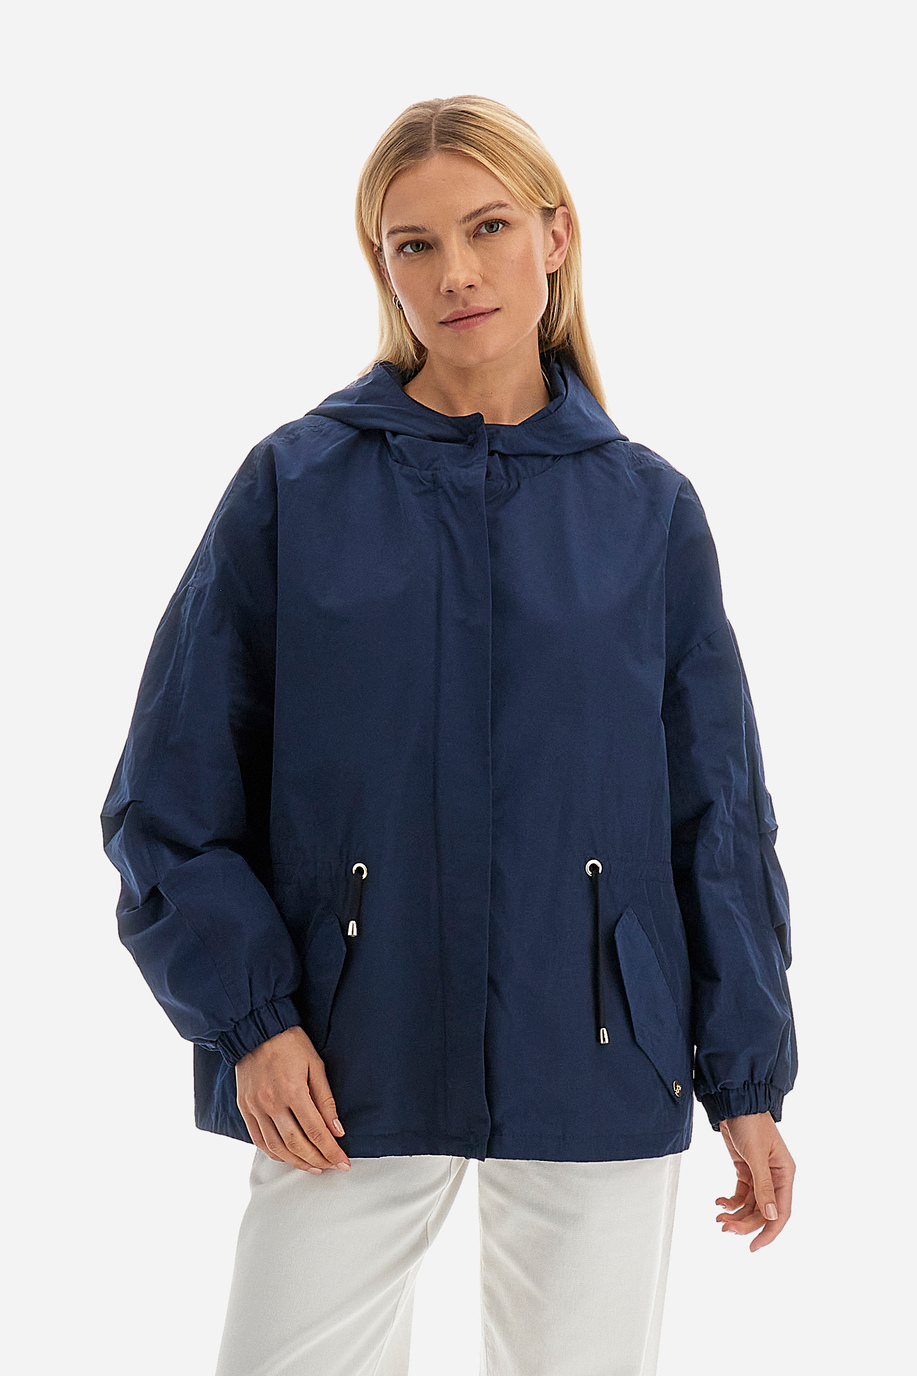 Solid color women's capsule Spring Weekend trench jacket with pockets - Vandani - Outerwear | La Martina - Official Online Shop